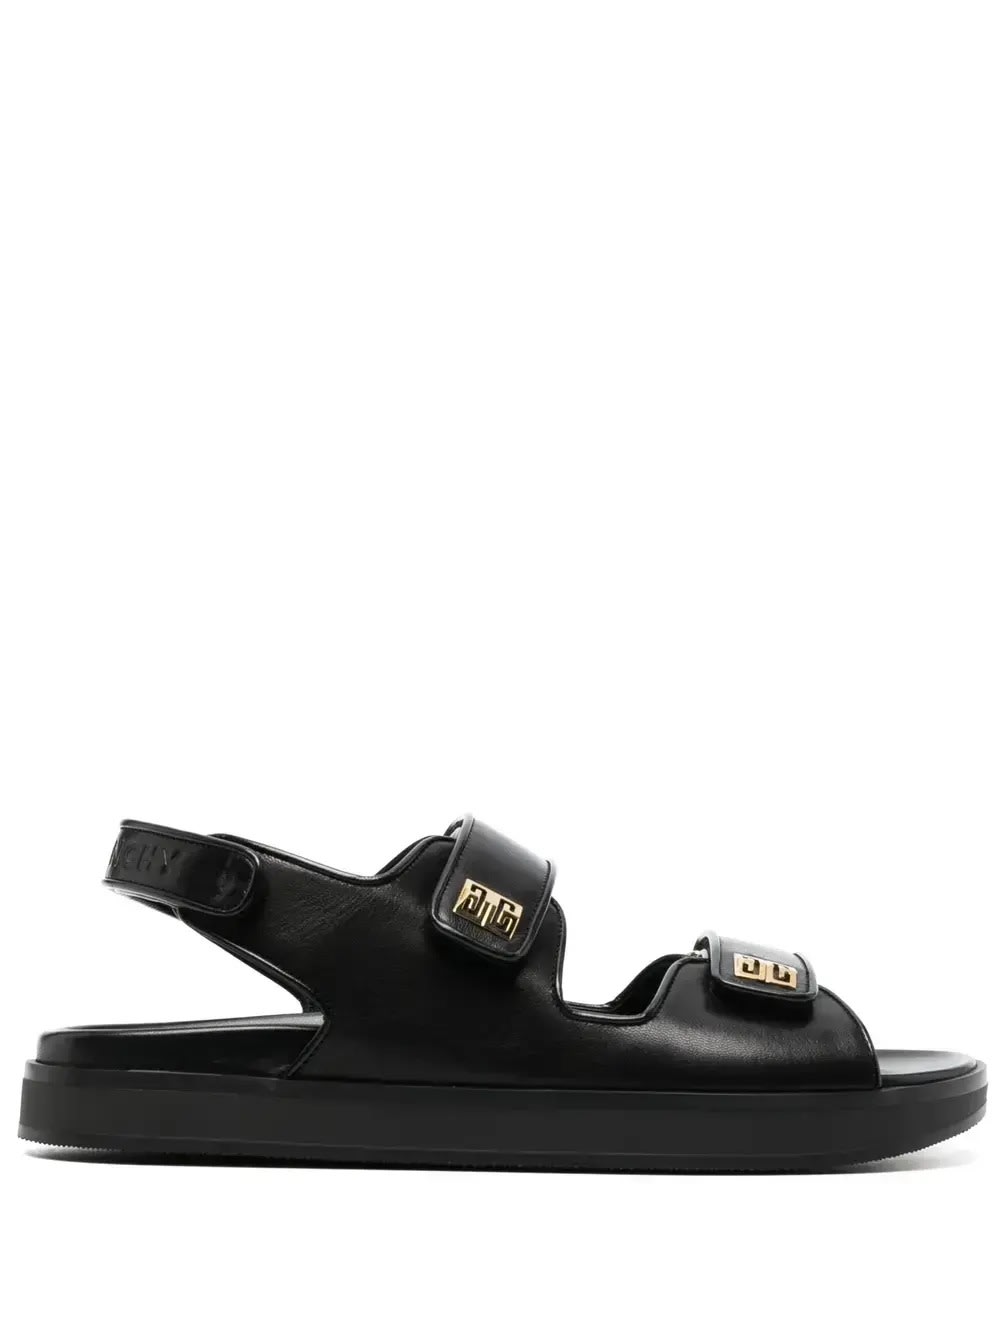 Givenchy Black Leather Sandals With 4g Logo Plaque